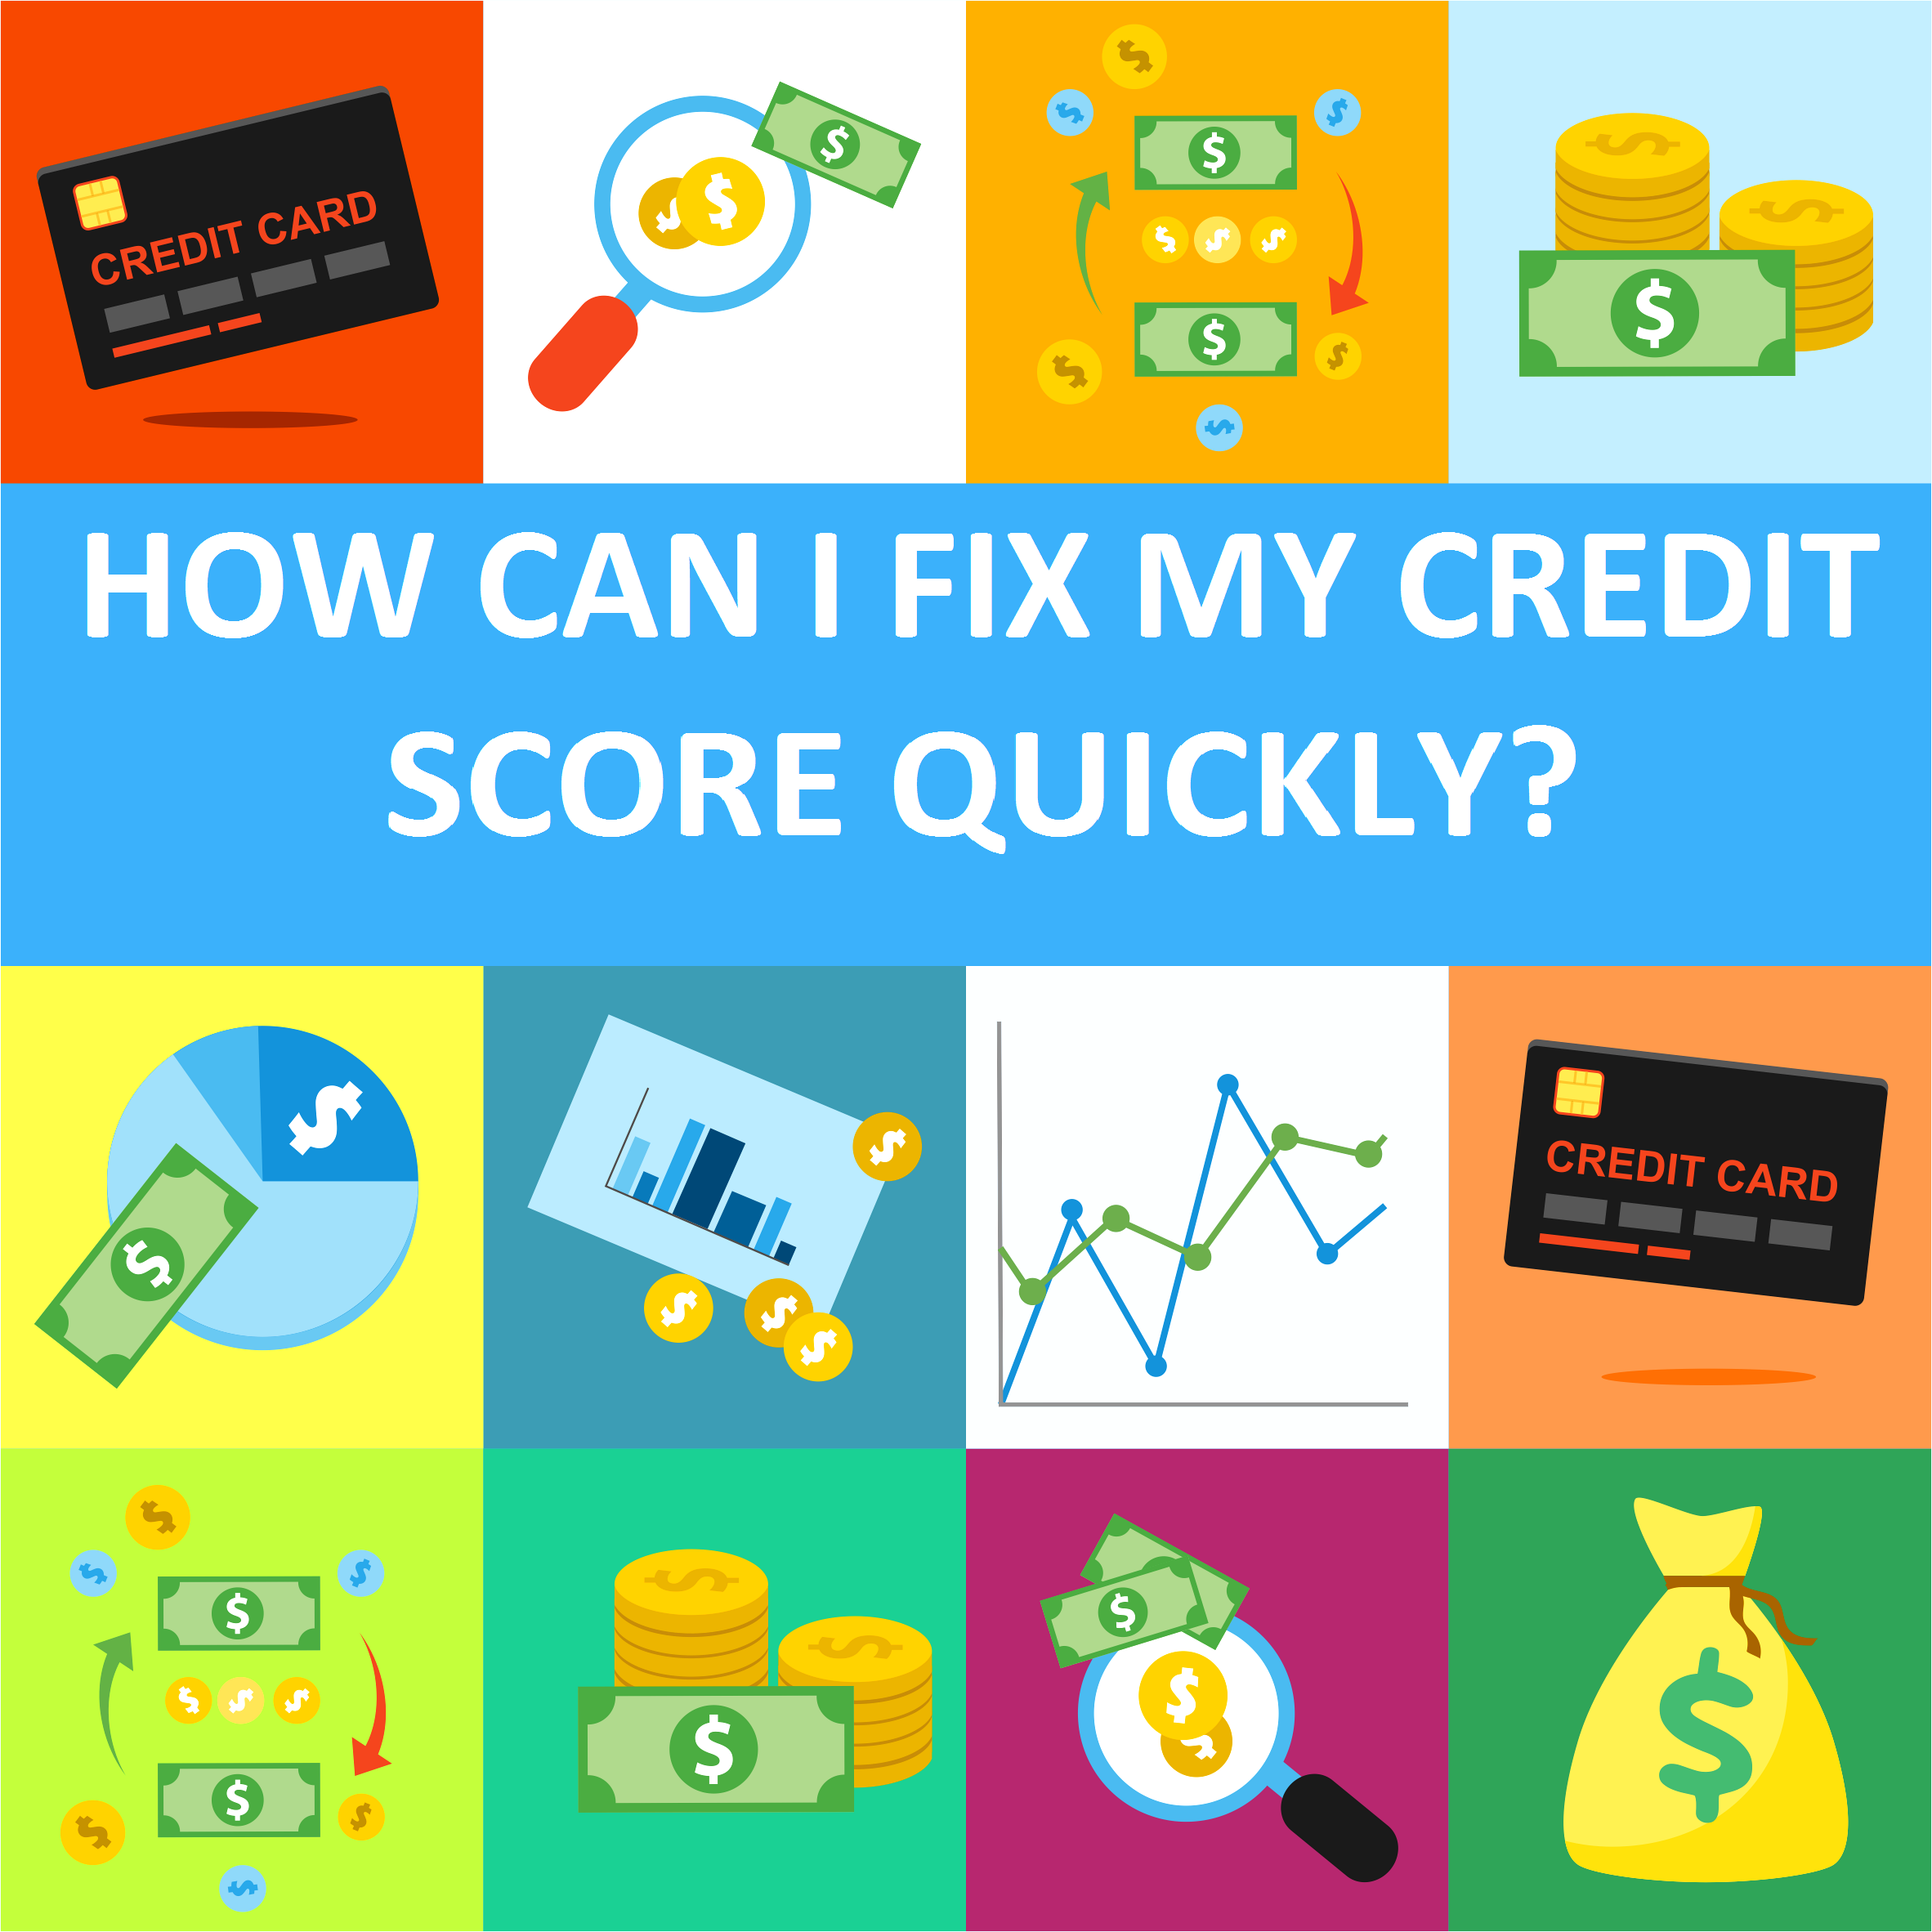 How Can I Fix My Credit Score Quickly?